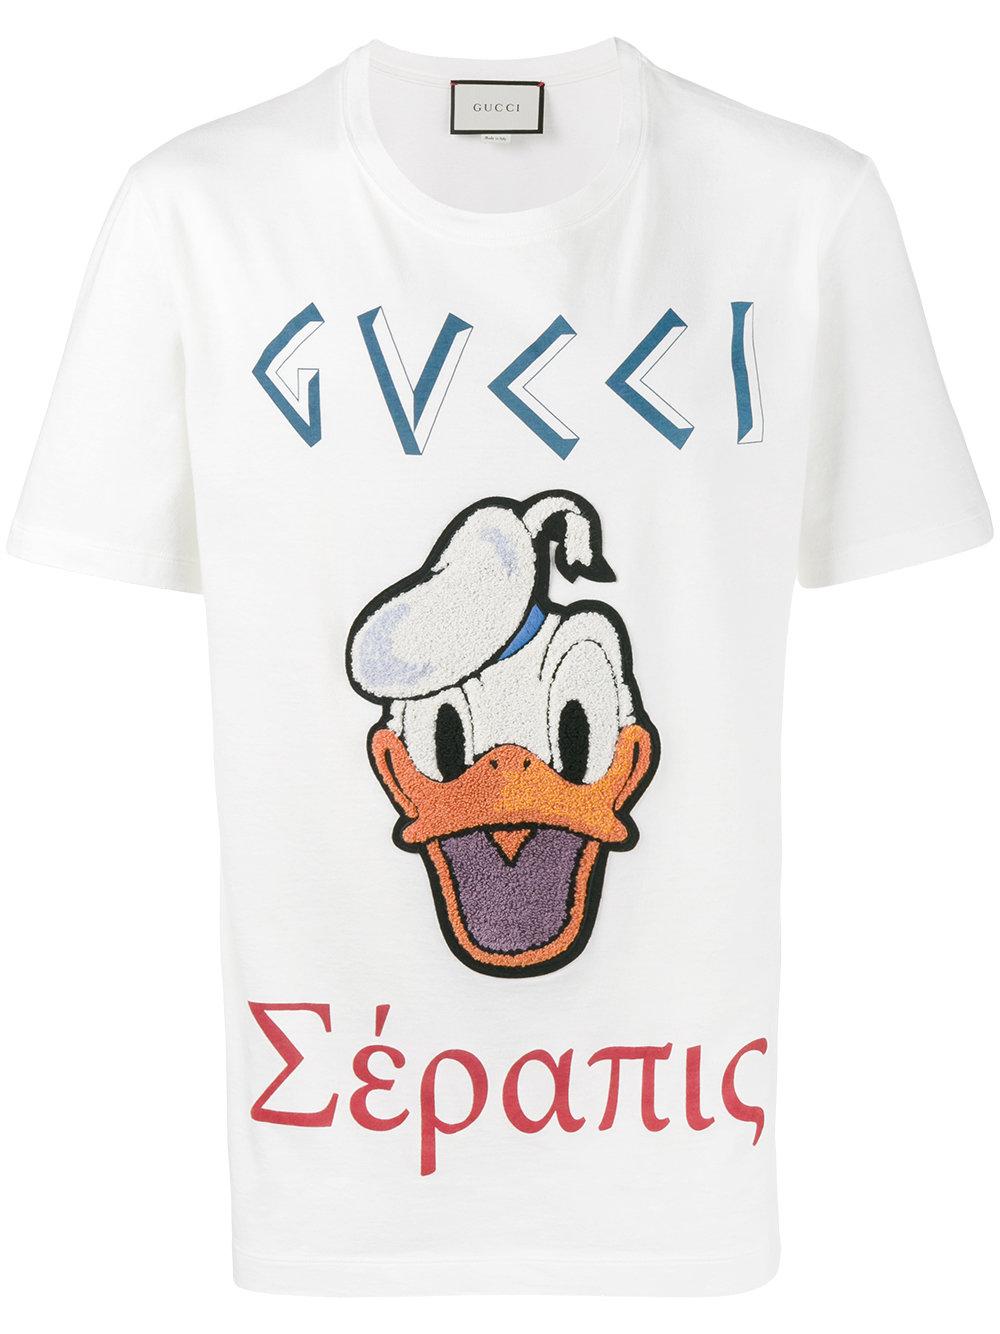 Gucci Donald Duck Embroidered T-shirt in White for Men - Lyst